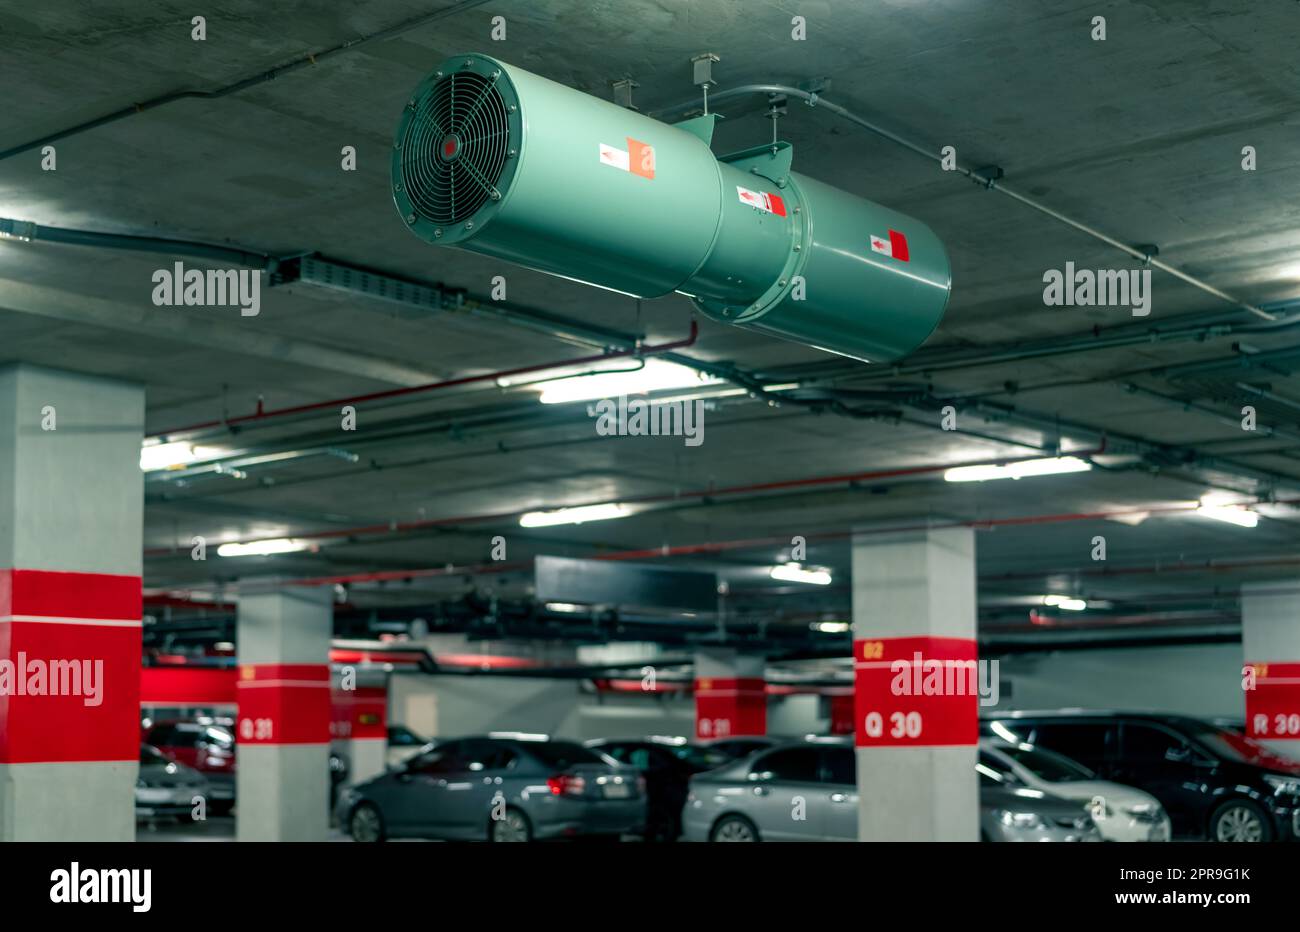 Jet fan at underground parking area. Ventilation fan in the parking lot. Air flow system. Ventilation system in underground car parking lot at commercial building. Duct fan air ventilation at mall. Stock Photo